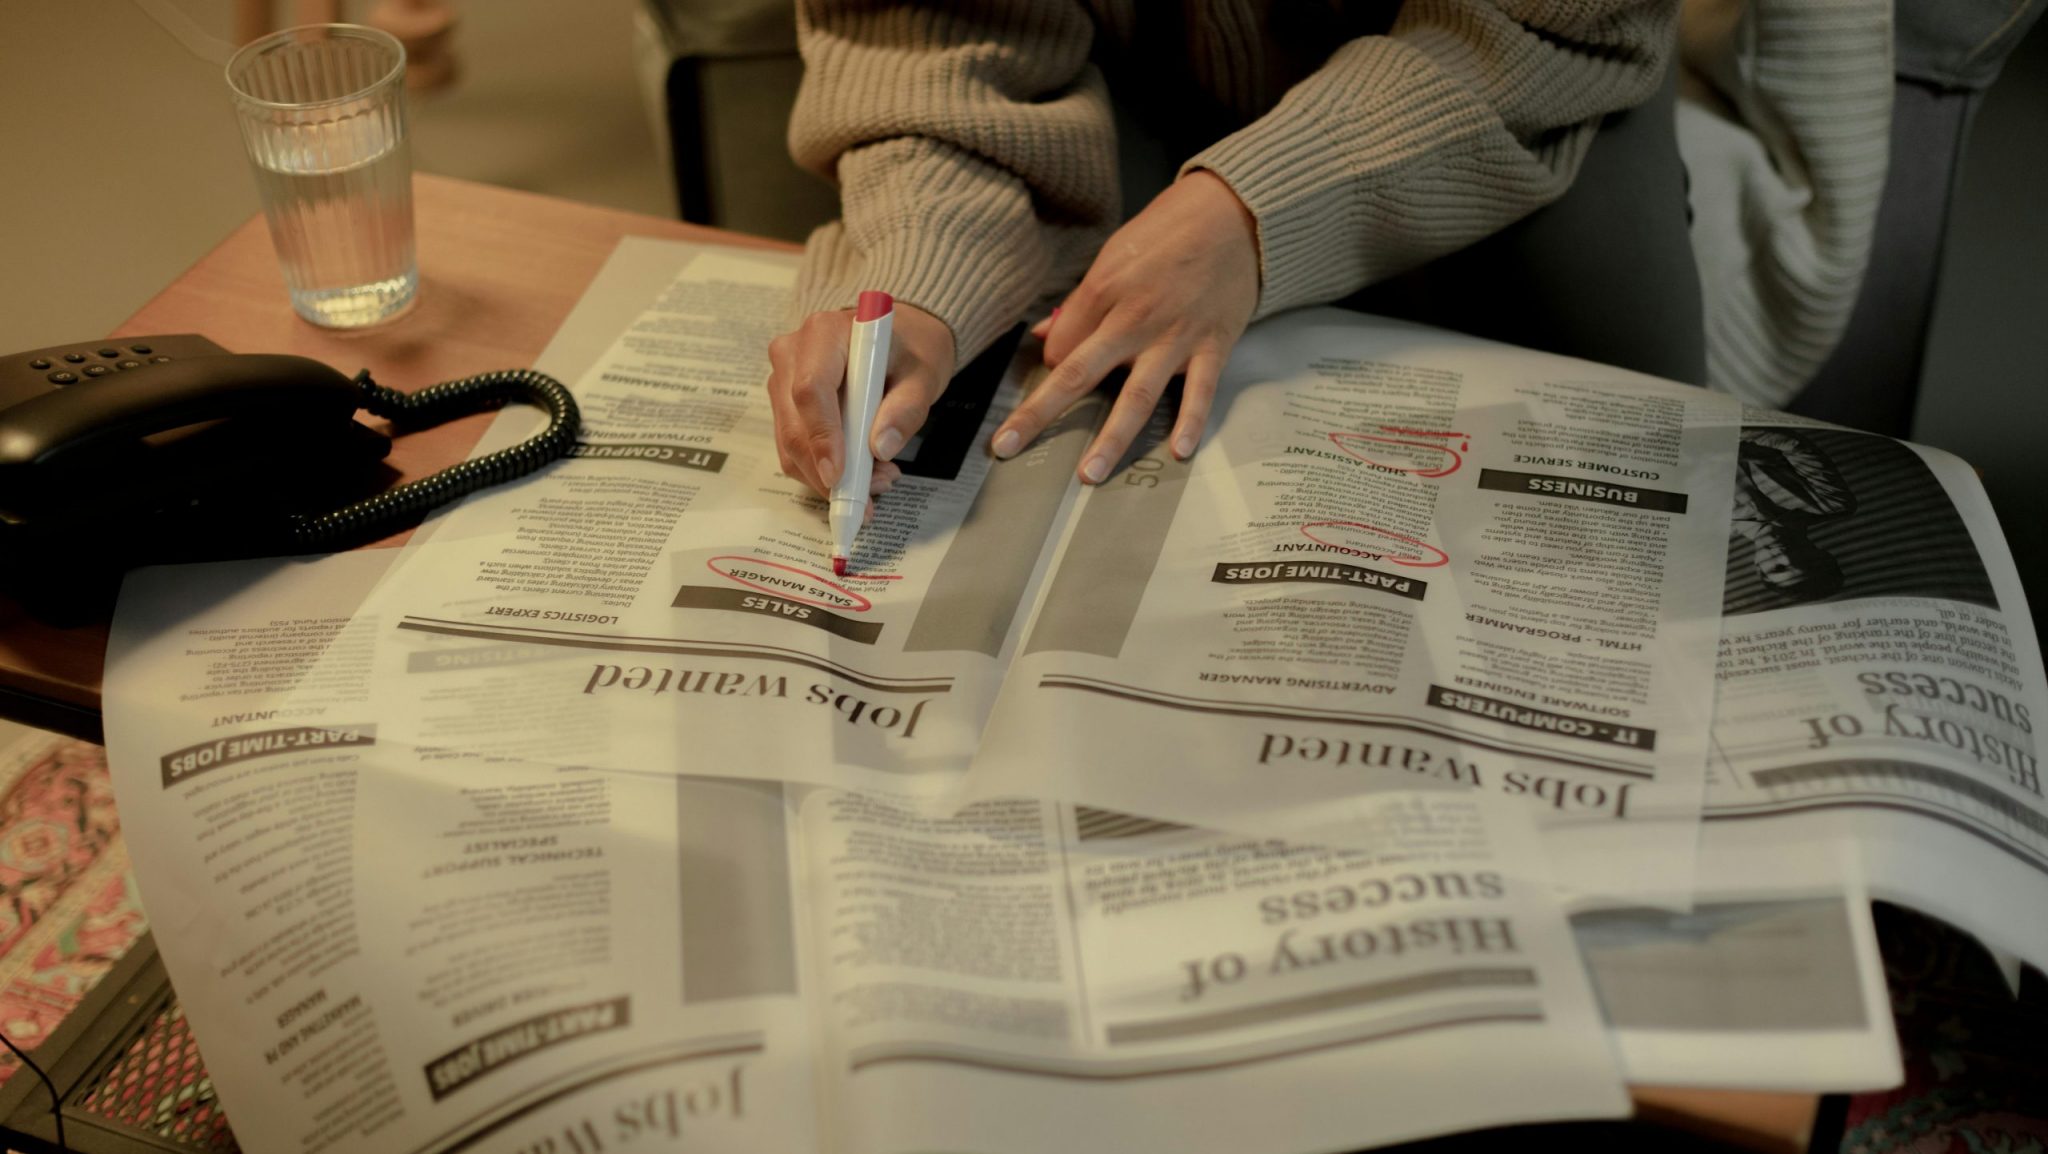 A woman circles job listings in the newspaper.